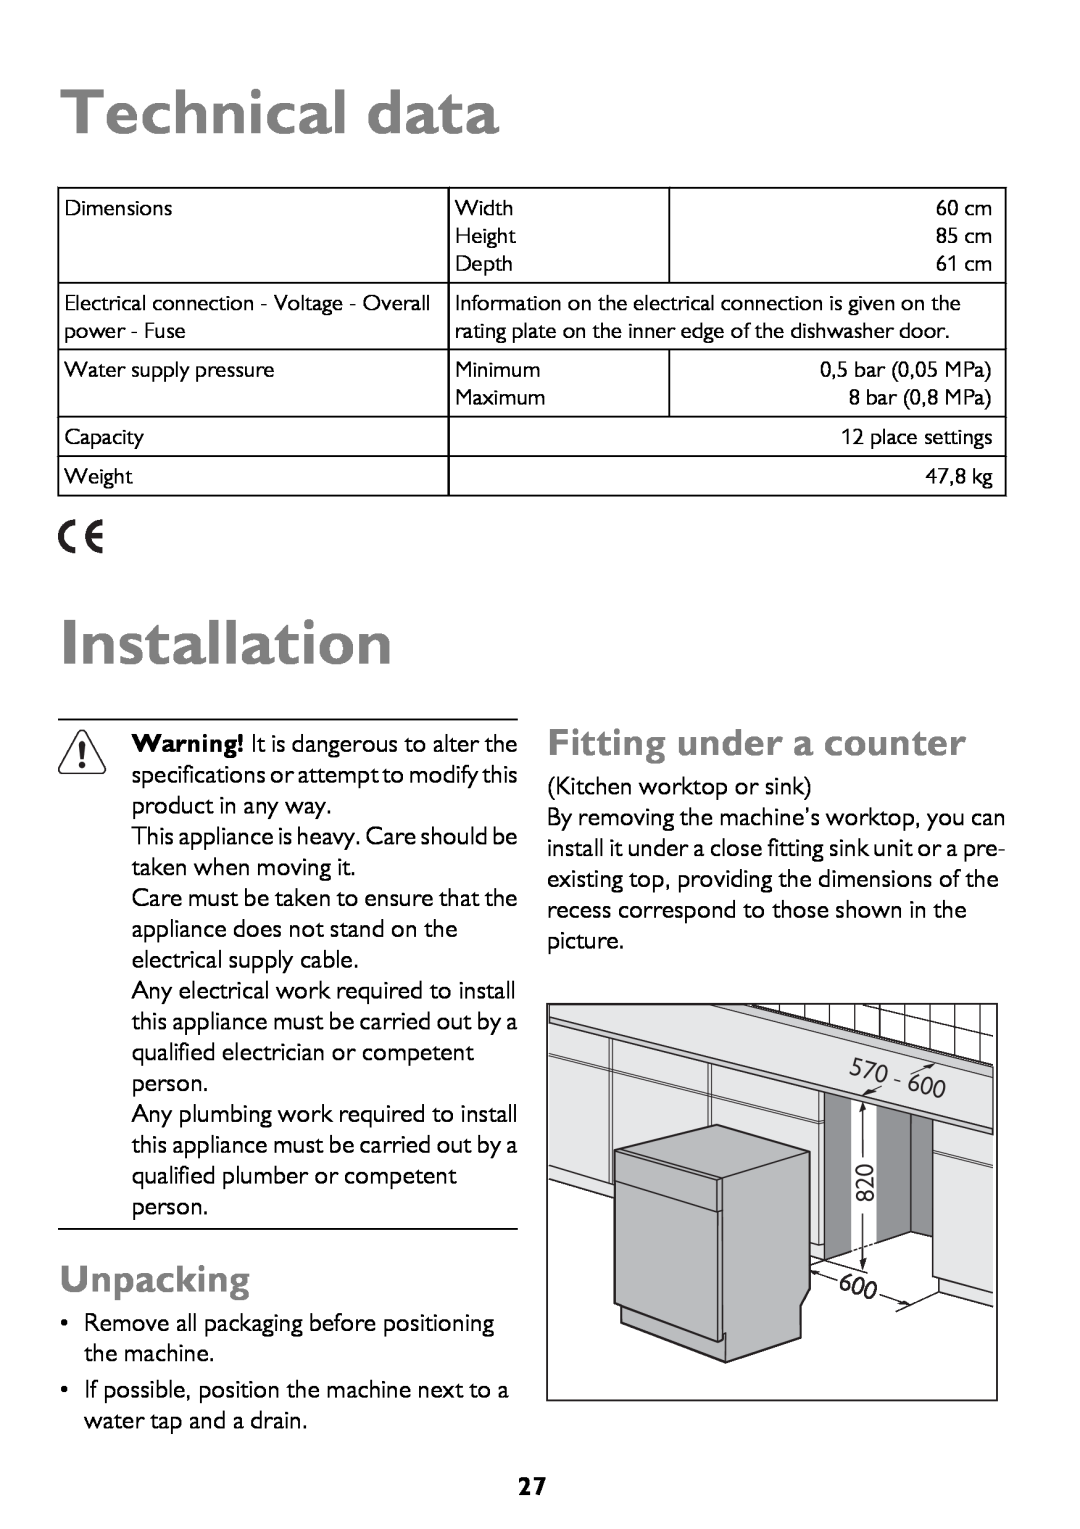 John Lewis JLDWW 1206 instruction manual Technical data, Installation, Unpacking, Fitting under a counter 